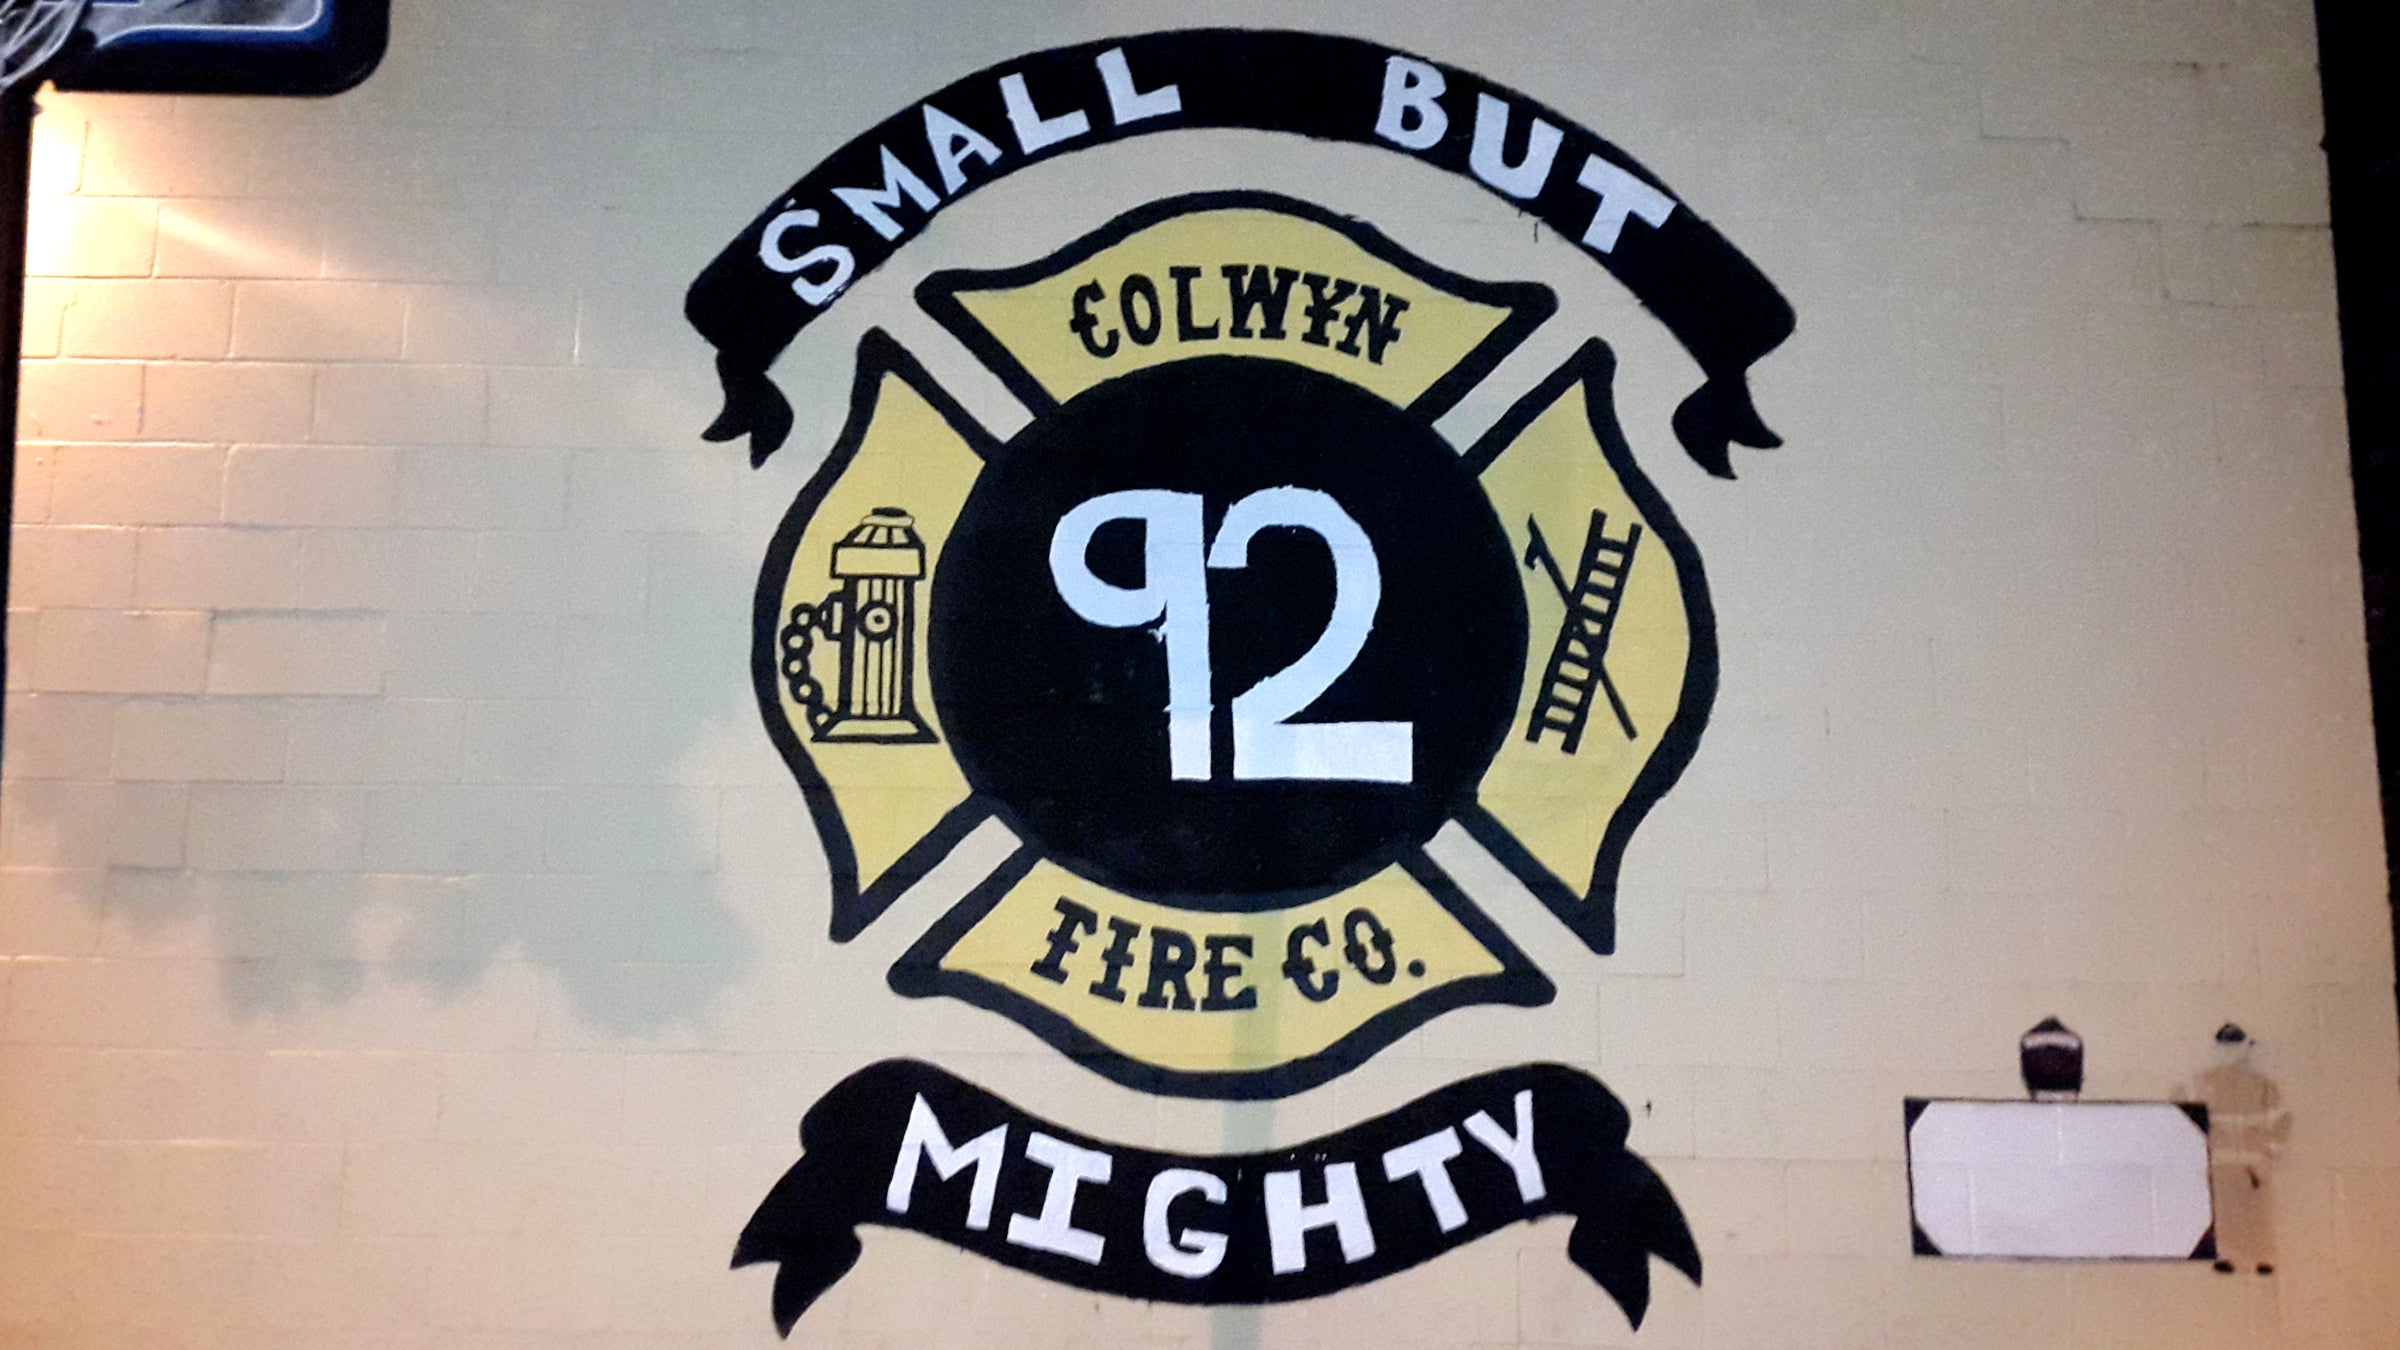  Part of the financial recovery plan calls for absorbing the fire department's budget into borough's general budget. The fire department is one of several entities in Colwyn under investigation by the Delaware County District Attorney's office. (Laura Benshoff/WHYY) 